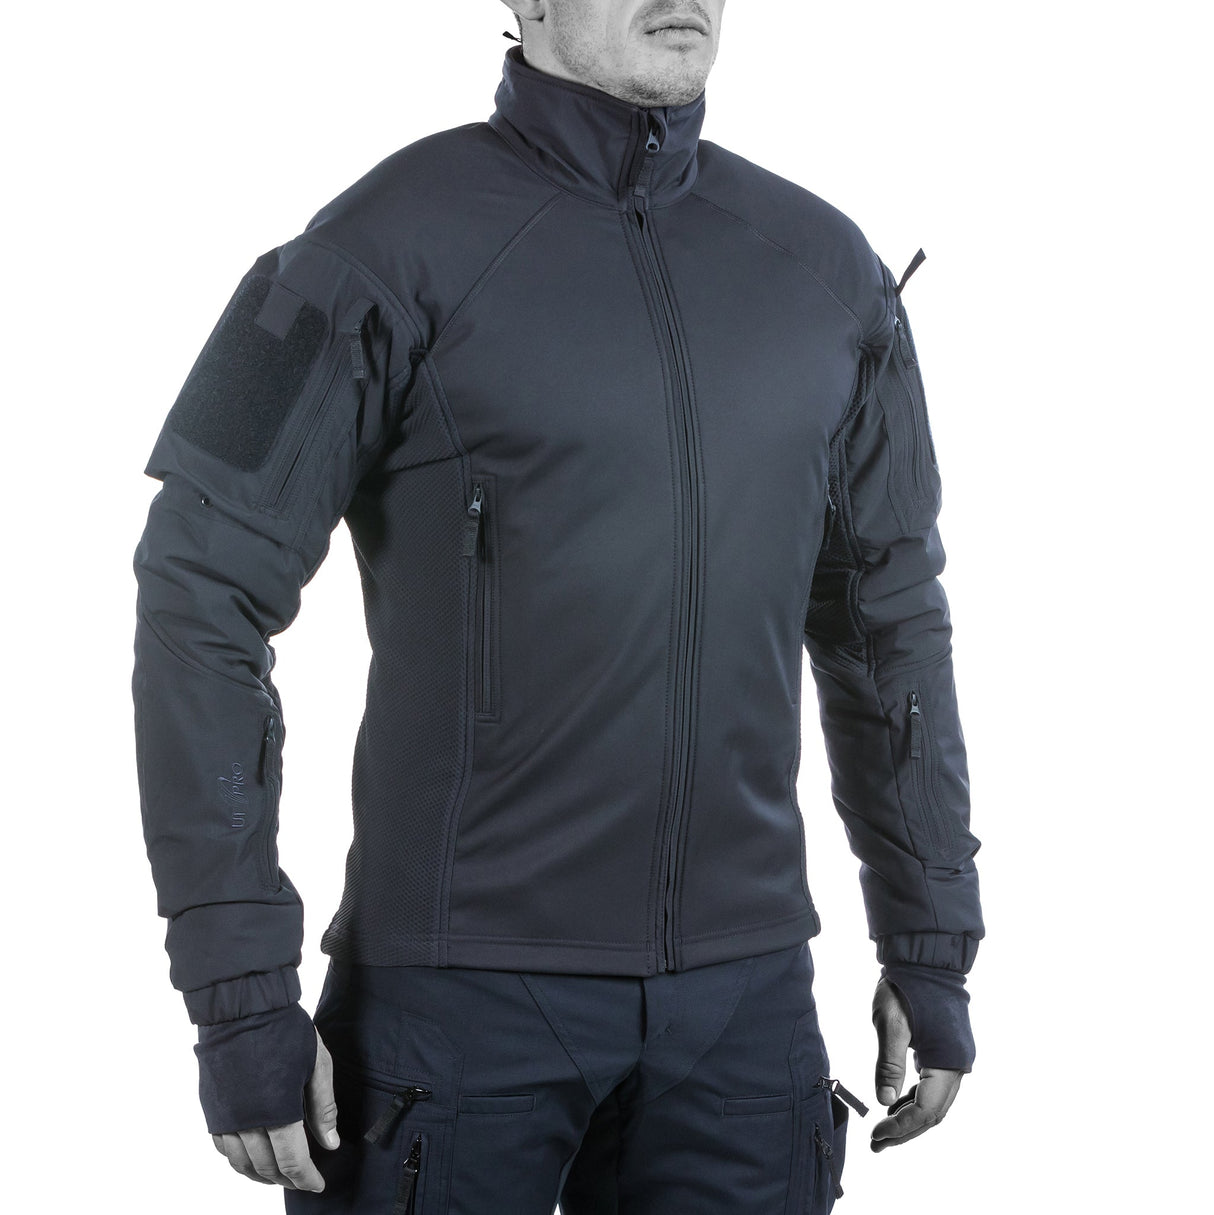 Extreme Cold Weather Jacket: Stay protected in freezing temperatures with Delta Ace Plus Gen.2.